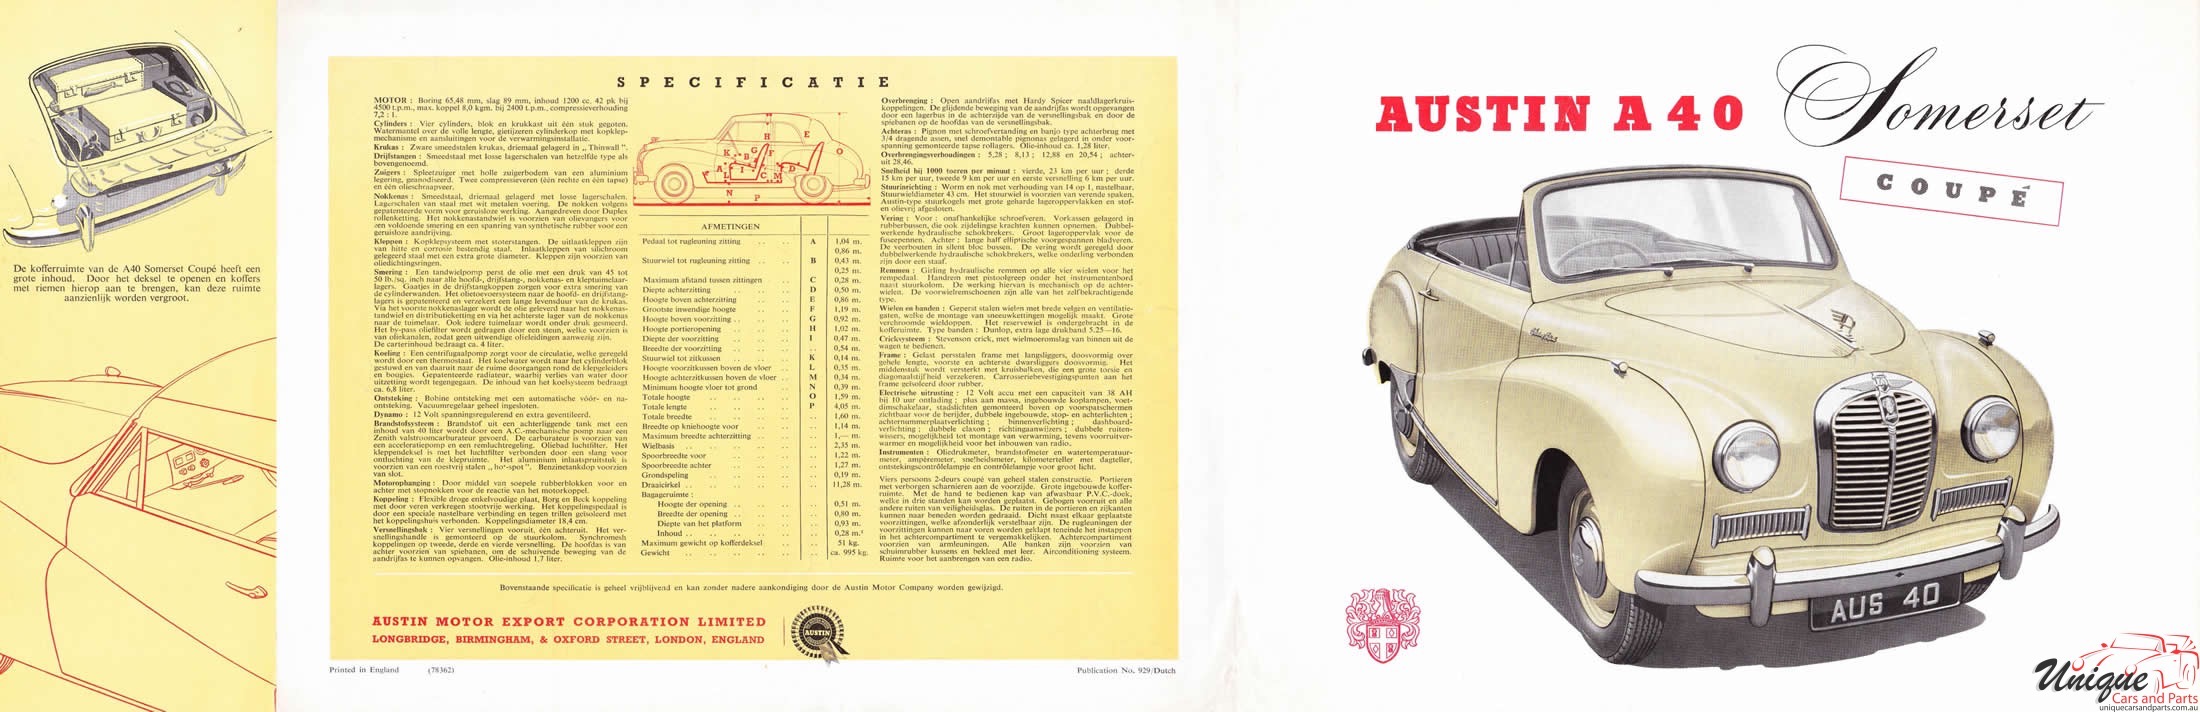 1950 Austin A40 Somerset Coupe Brochure Page 1